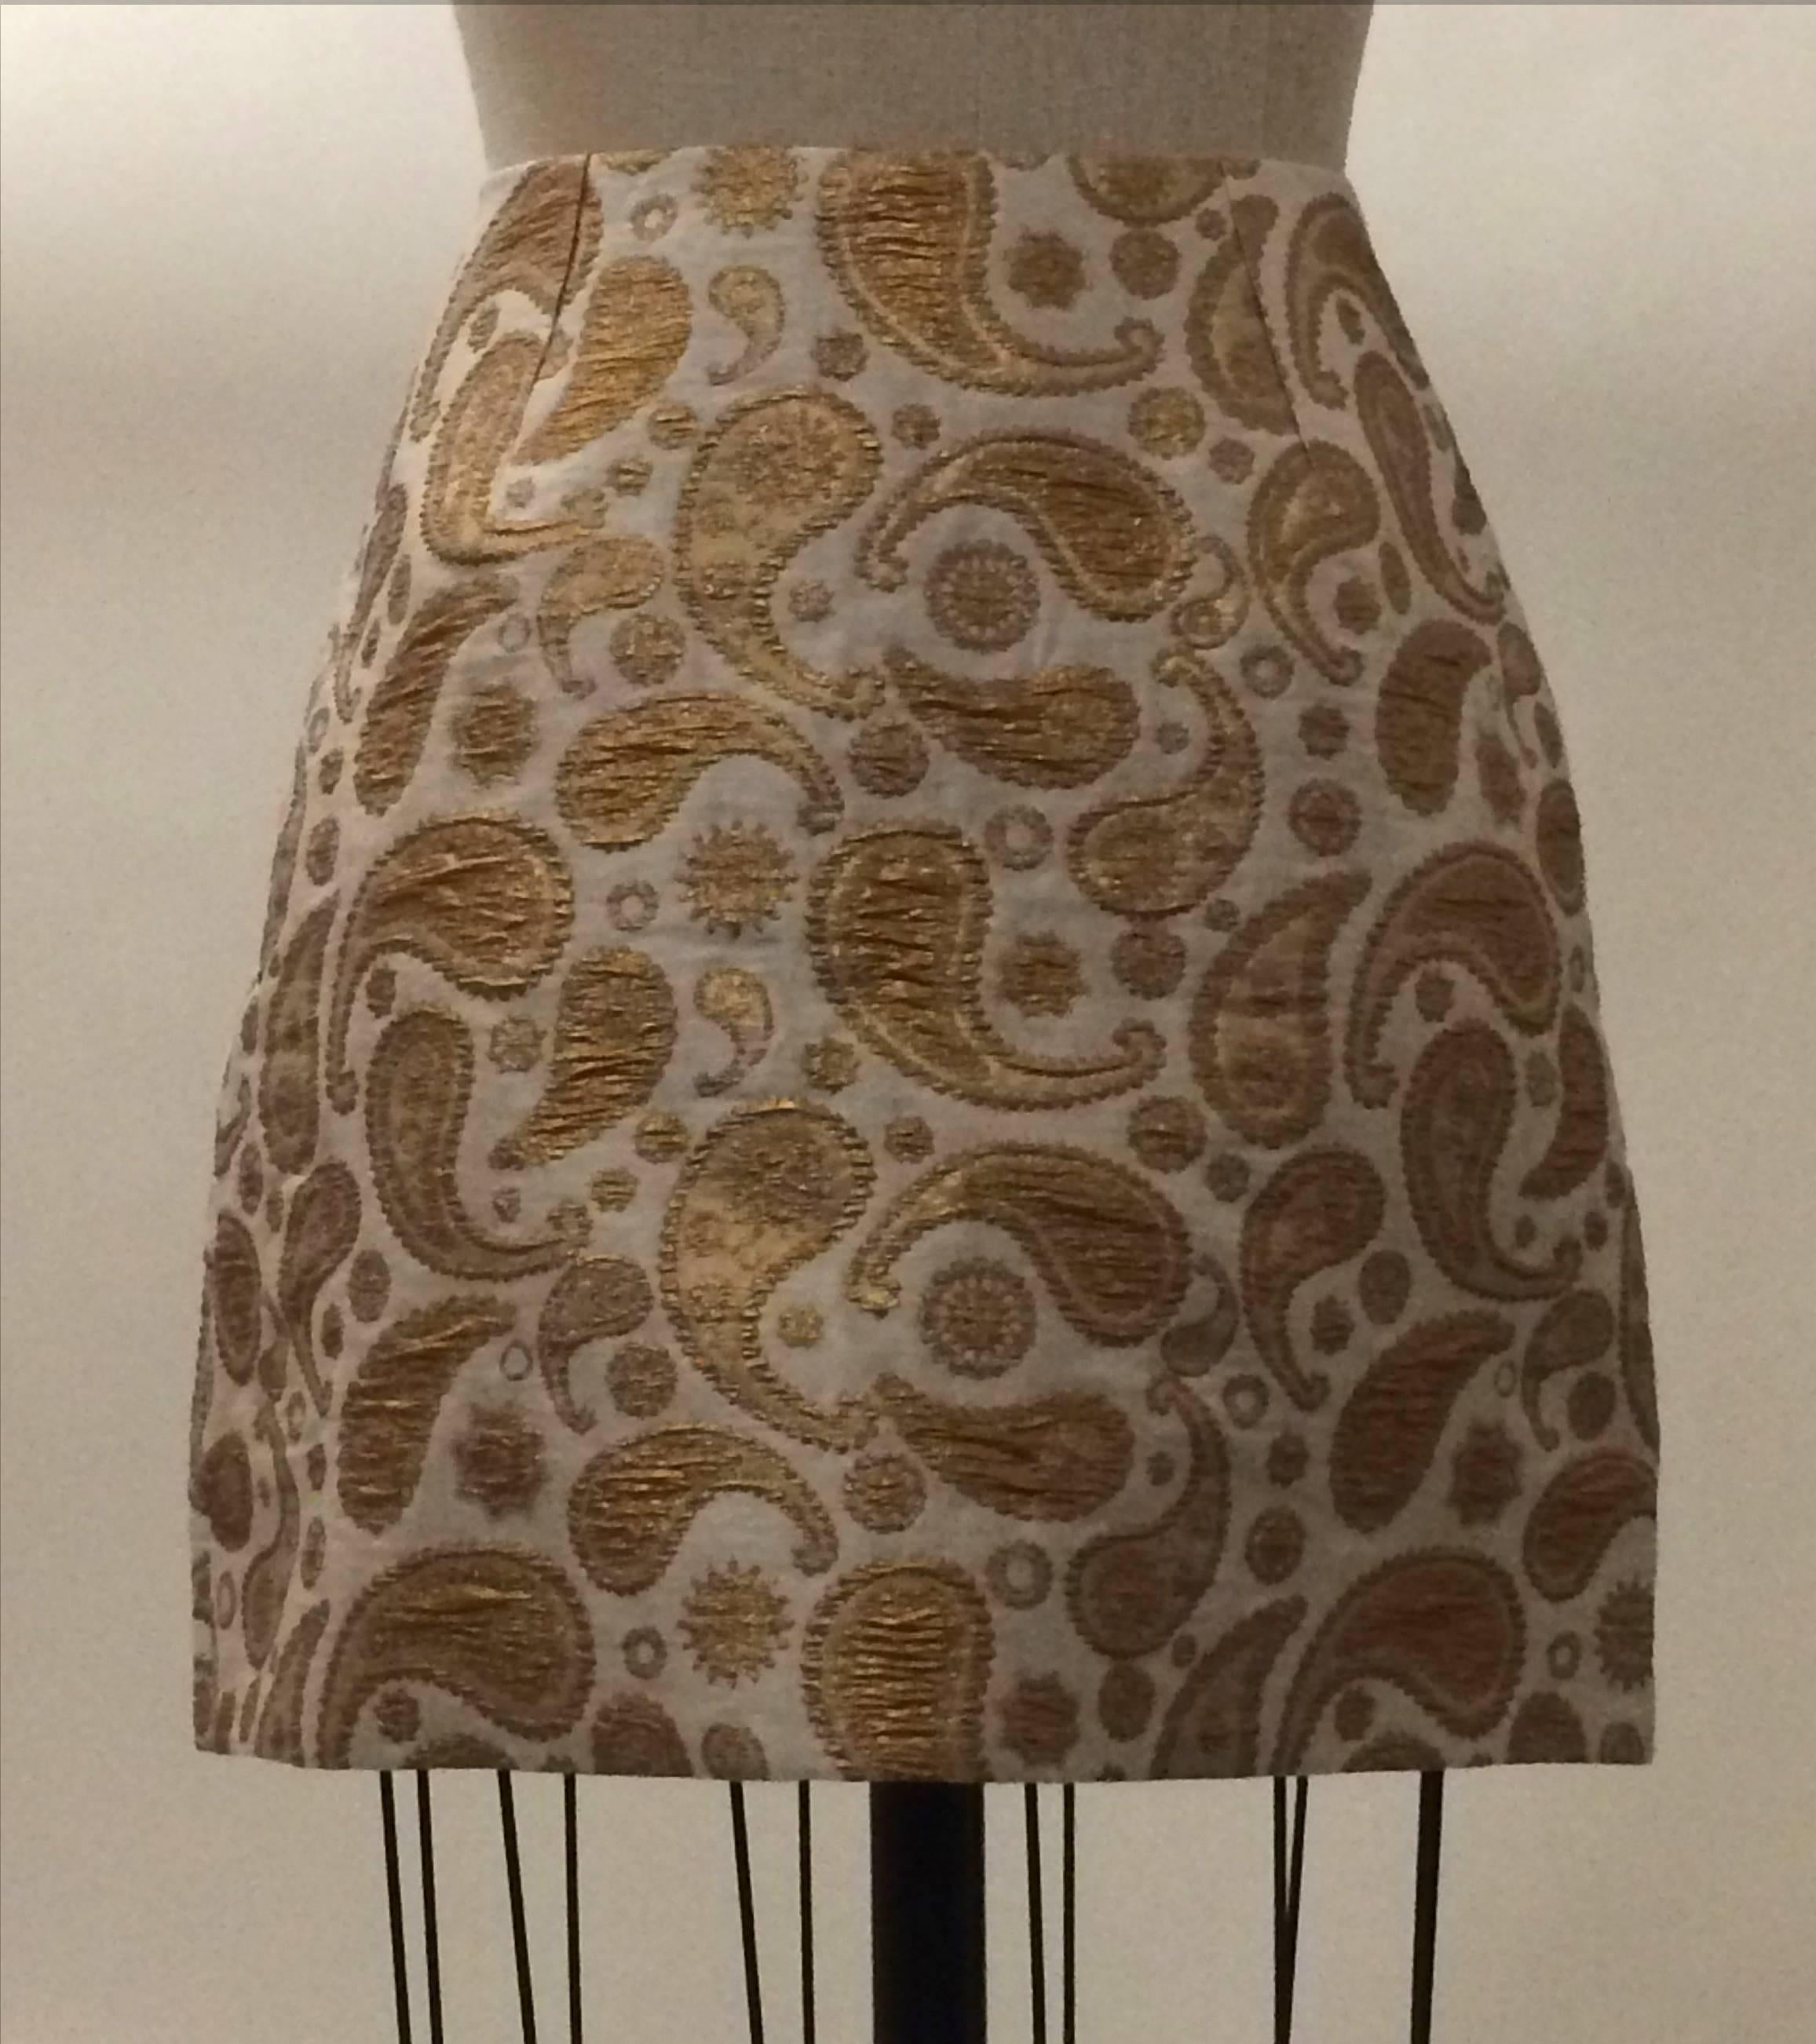 Stella McCartney cream mini skirt with gold jacquard paisley print throughout. Wrap style, fastens with two hidden snaps at front. 

58% cotton, 19% linen, 15% polyester, 8% polyamide.
Fully lined in 50% cotton, 50% viscose.

Made in